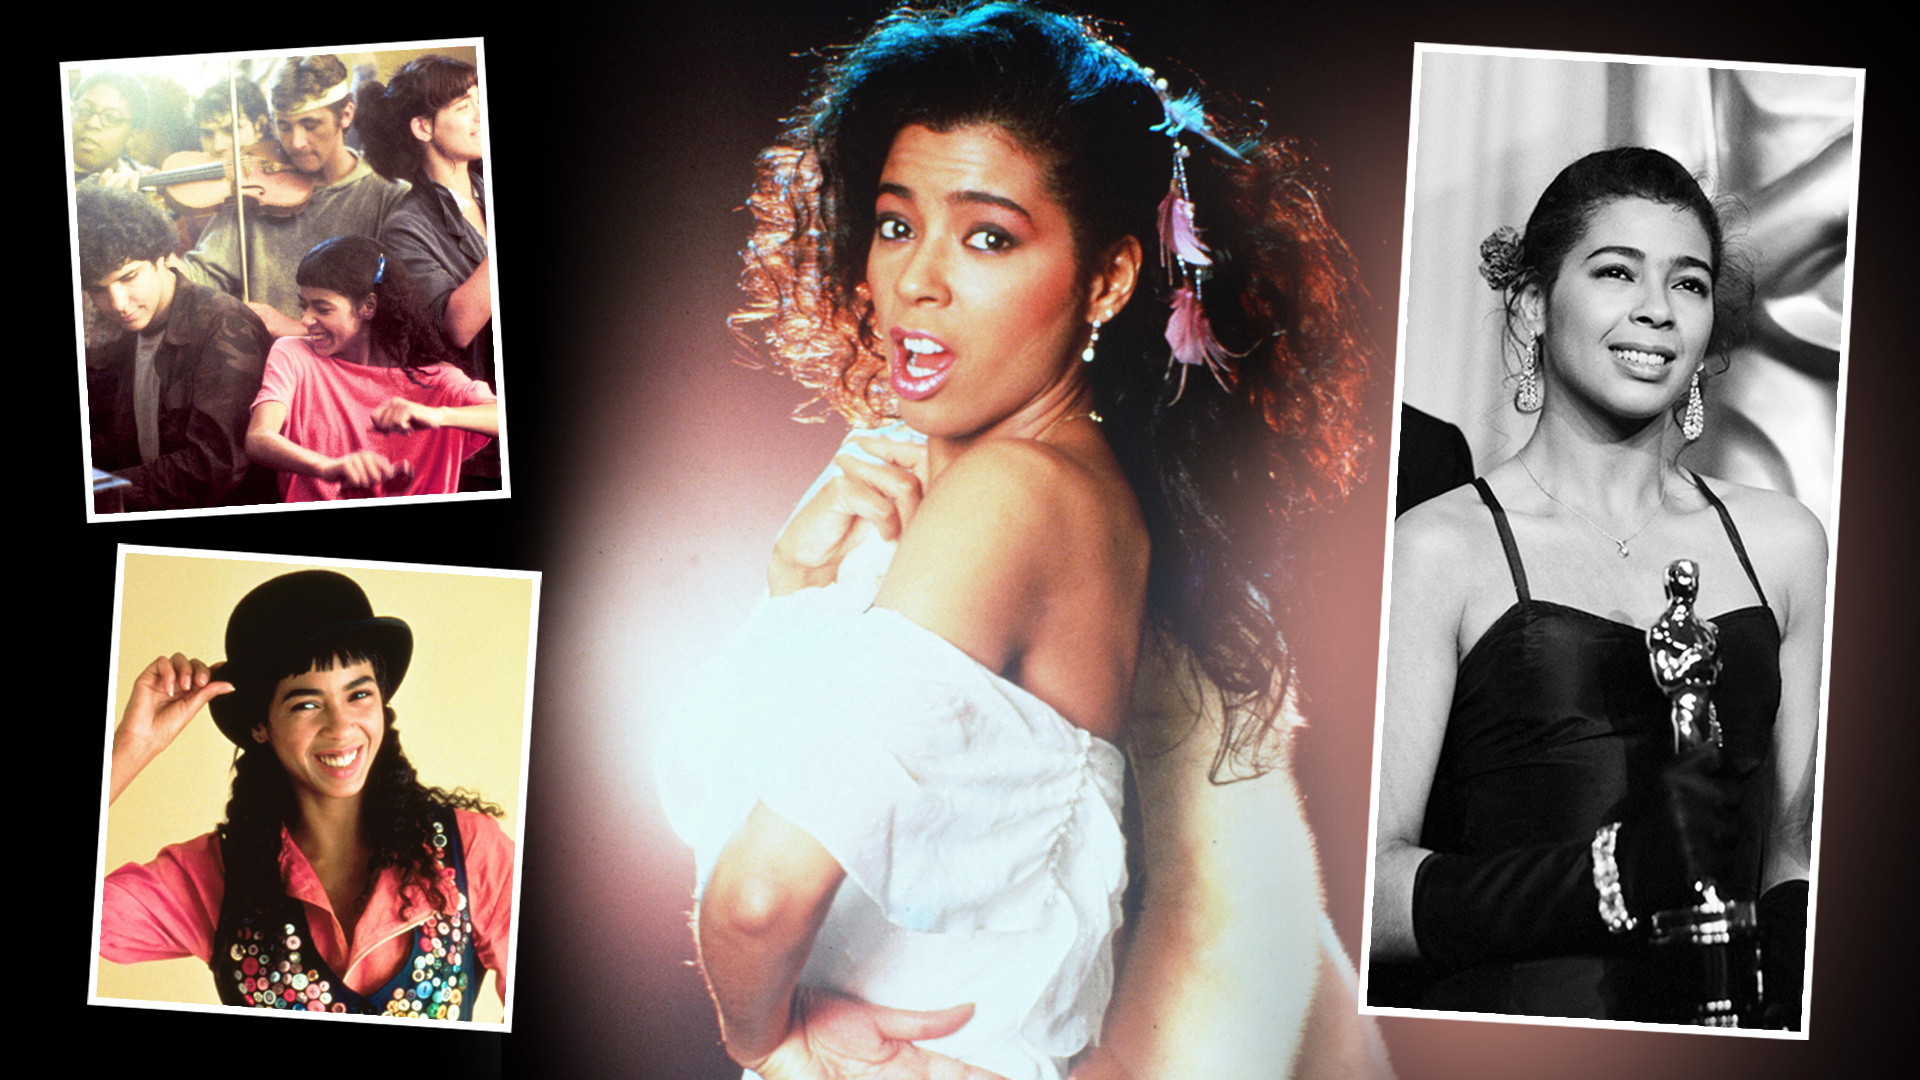 Irene Cara, a singer who hit stardom with ‘Fame’ and ‘Flashdance,’ dies at 63